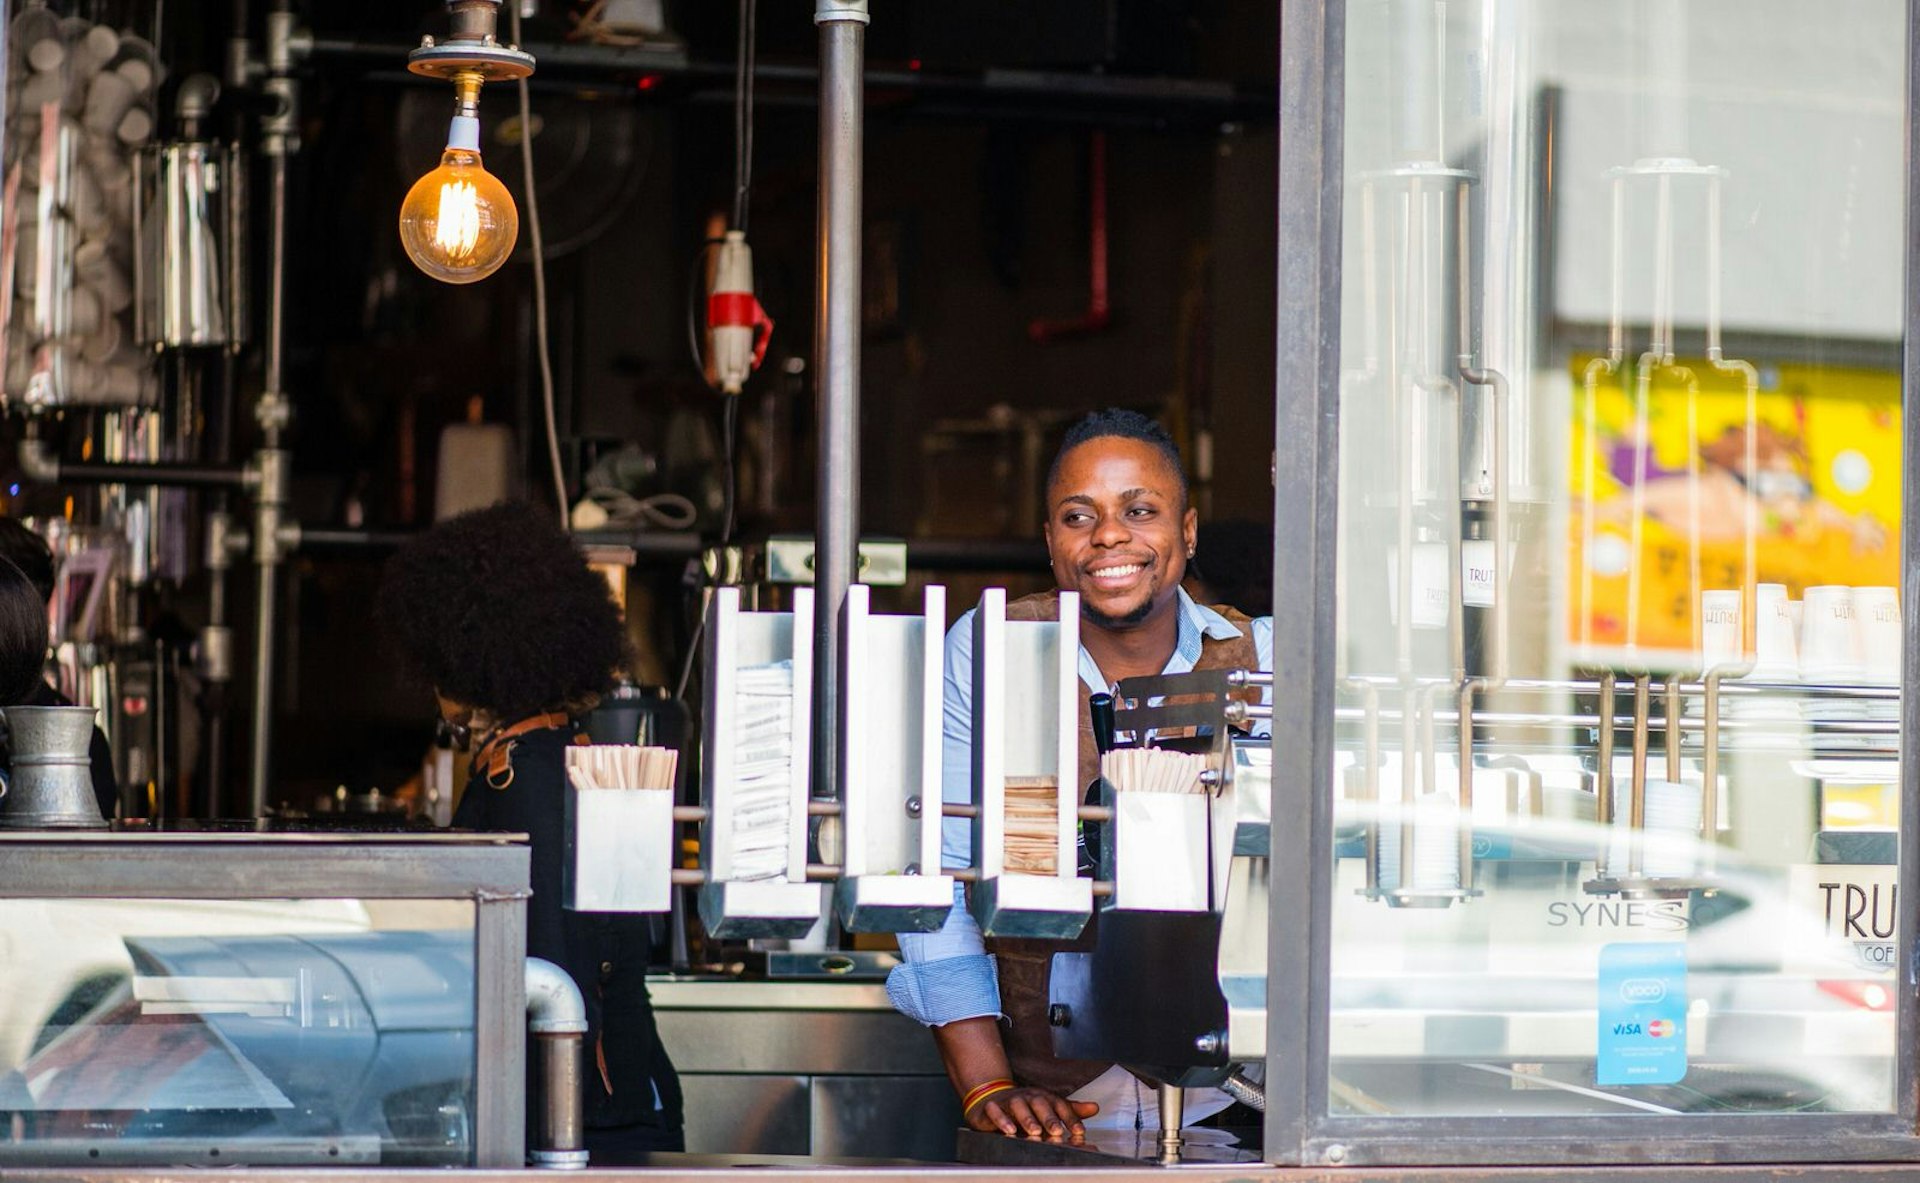 A smiling barista looks out a huge open window with a broad smile; behind him is the steampunk interior full of pipes and industrial pieces - it's an iconic scene in Cape Town coffee